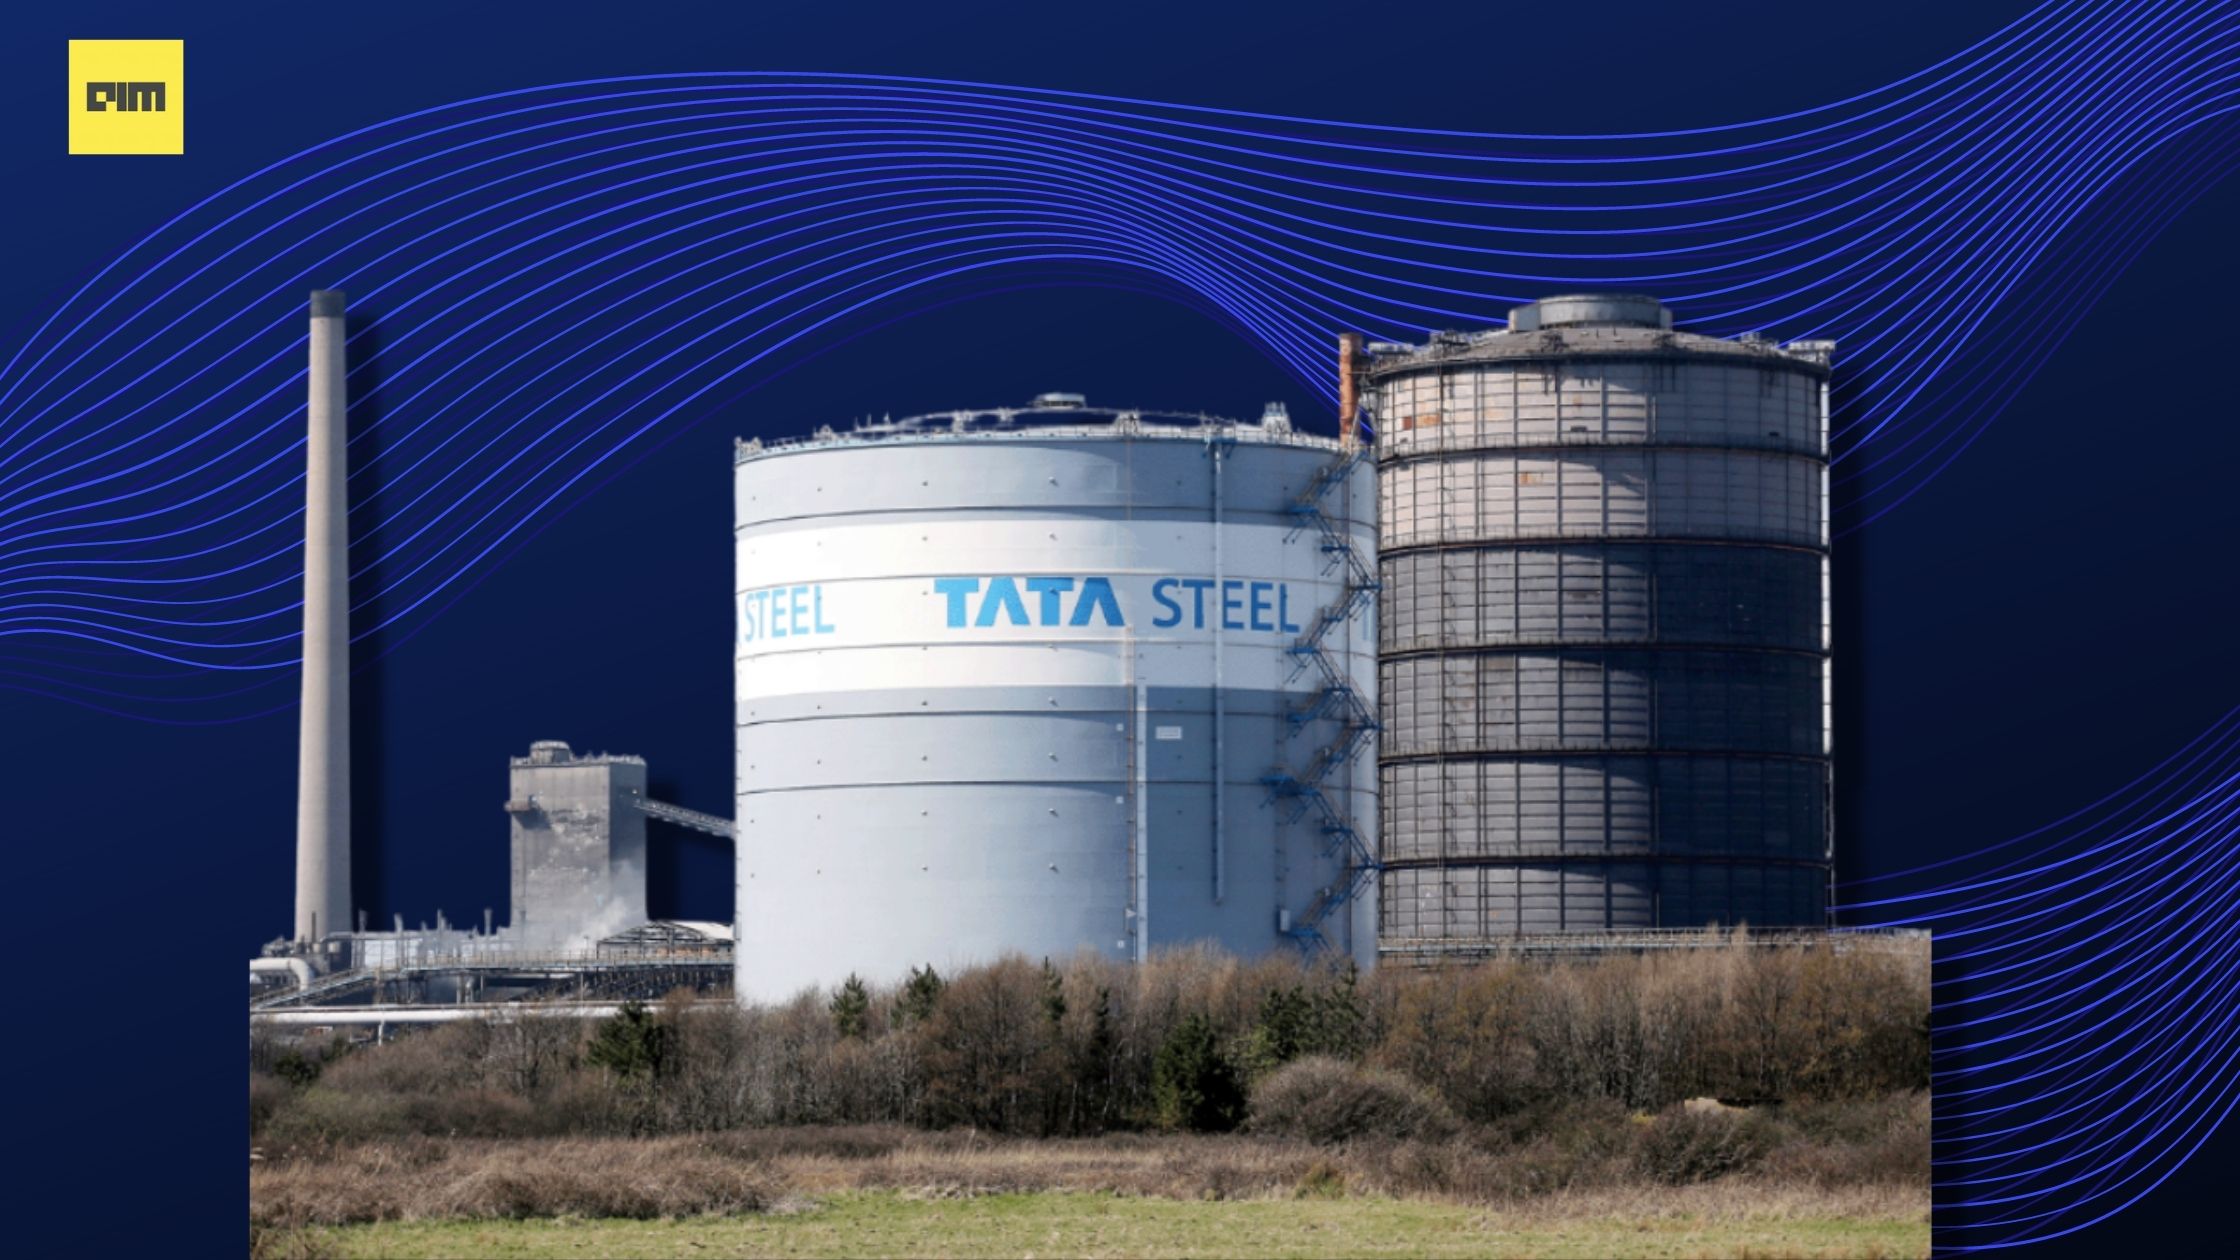 TATA Steel predicts manufacturing problems with machine learning